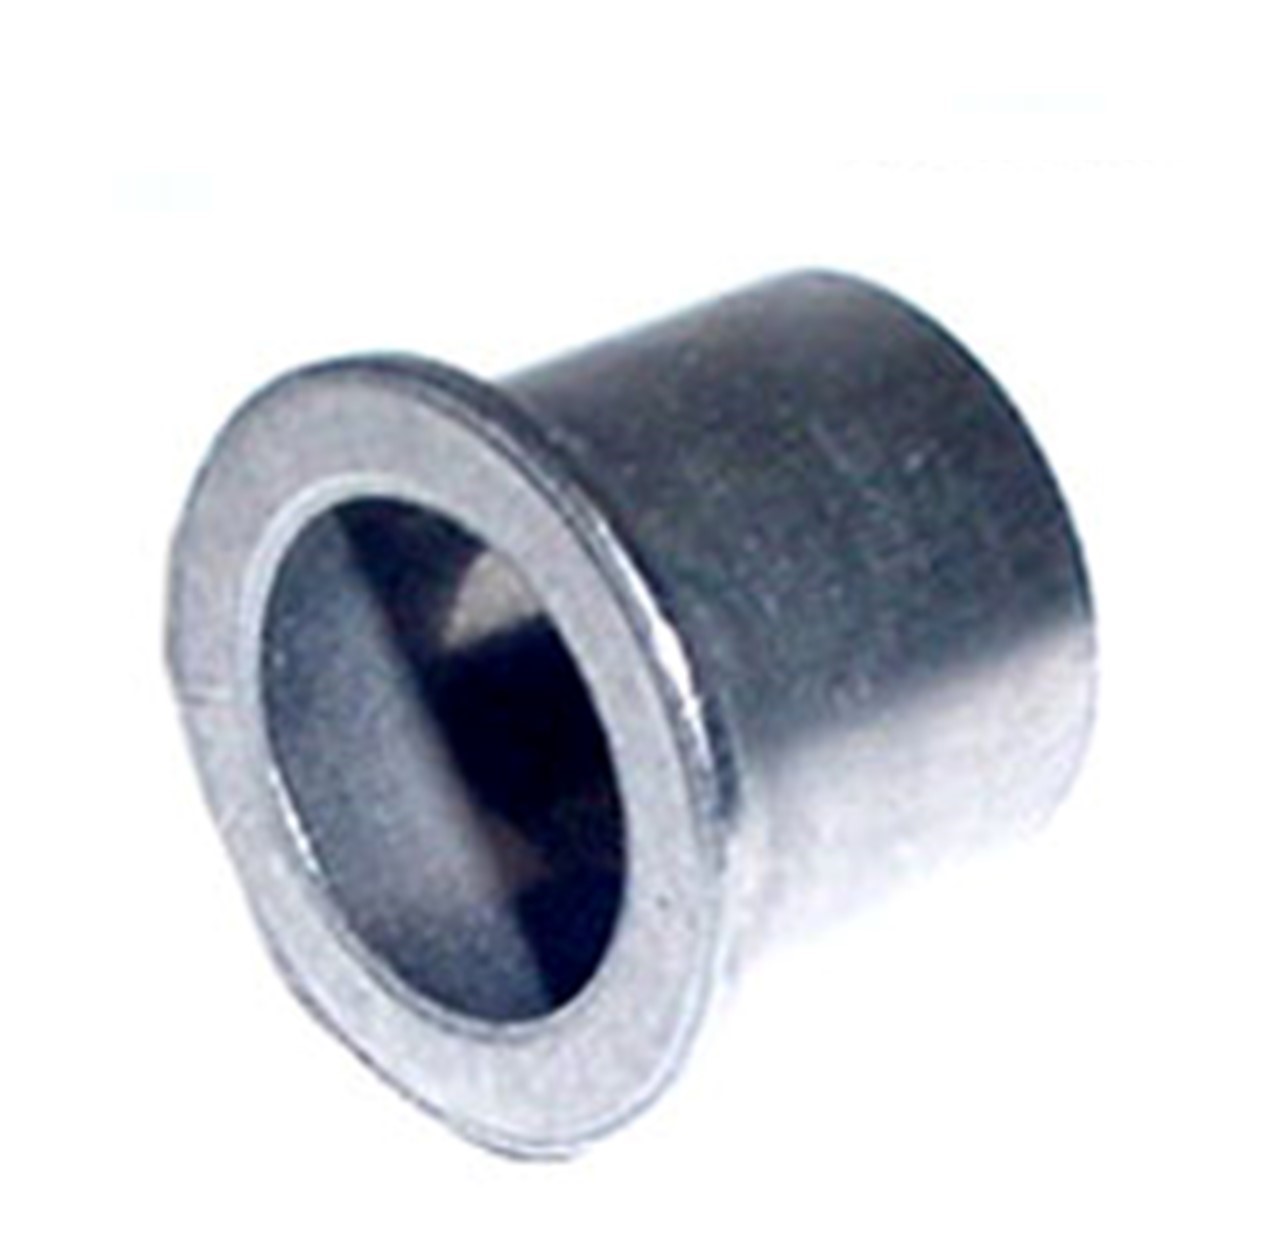 A-Arm Bushing Fits Most E-Ton 50,70,90cc ATVs (Oil Containing Bushing) ID=17 OD1=21 OD2=26 H=20 - Click Image to Close